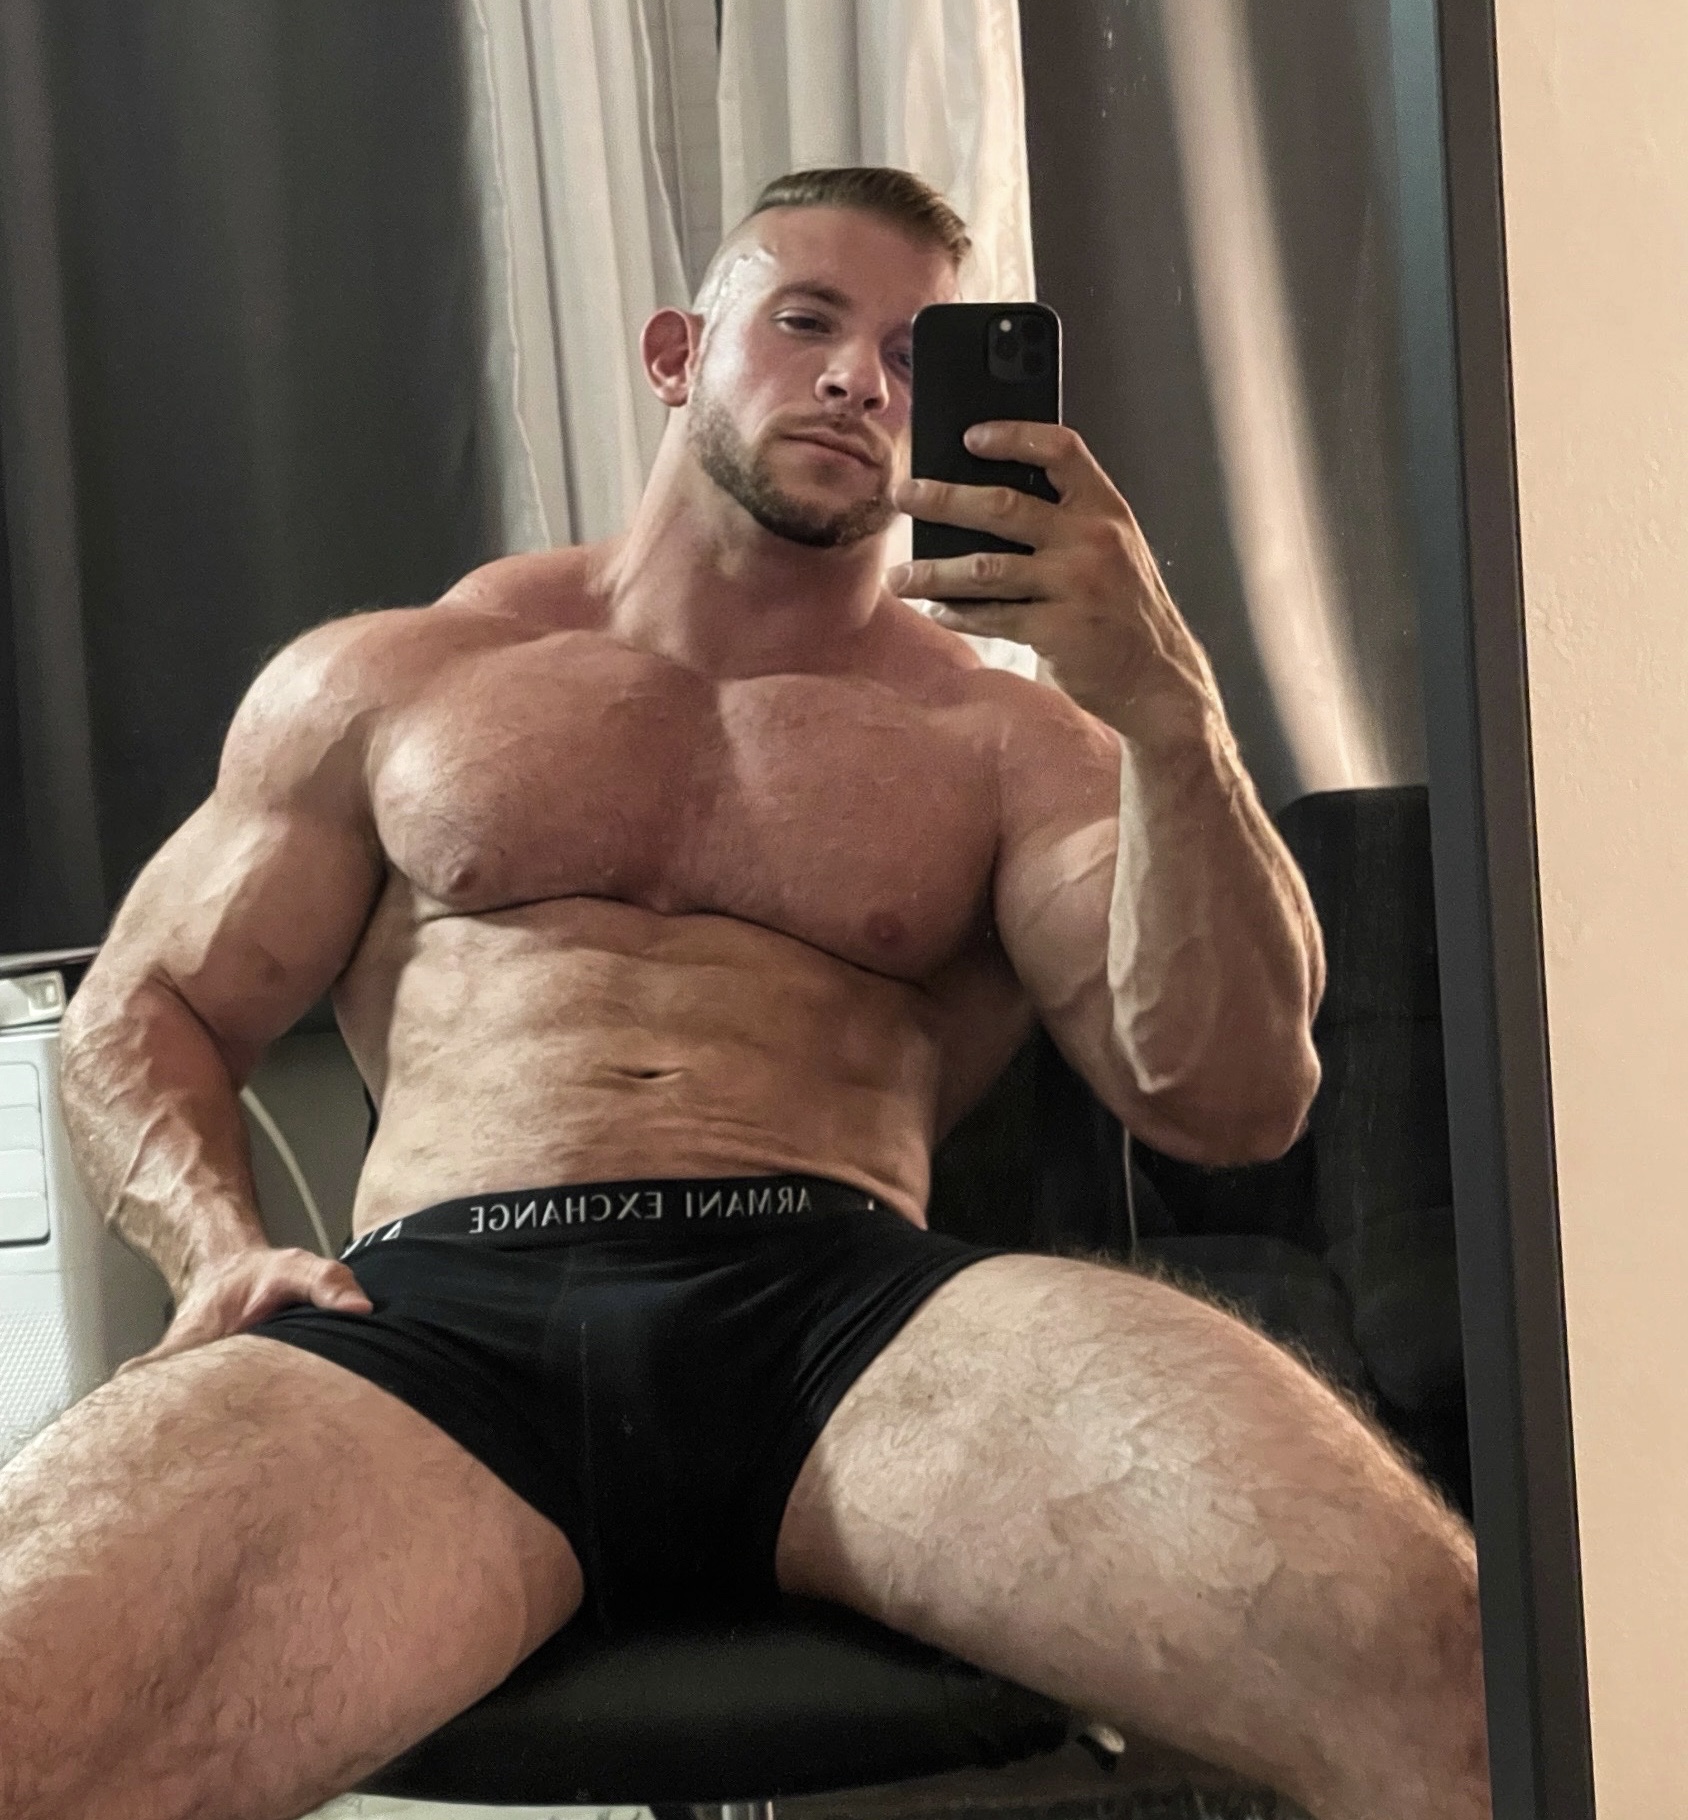 Onlyfans Musclestud624